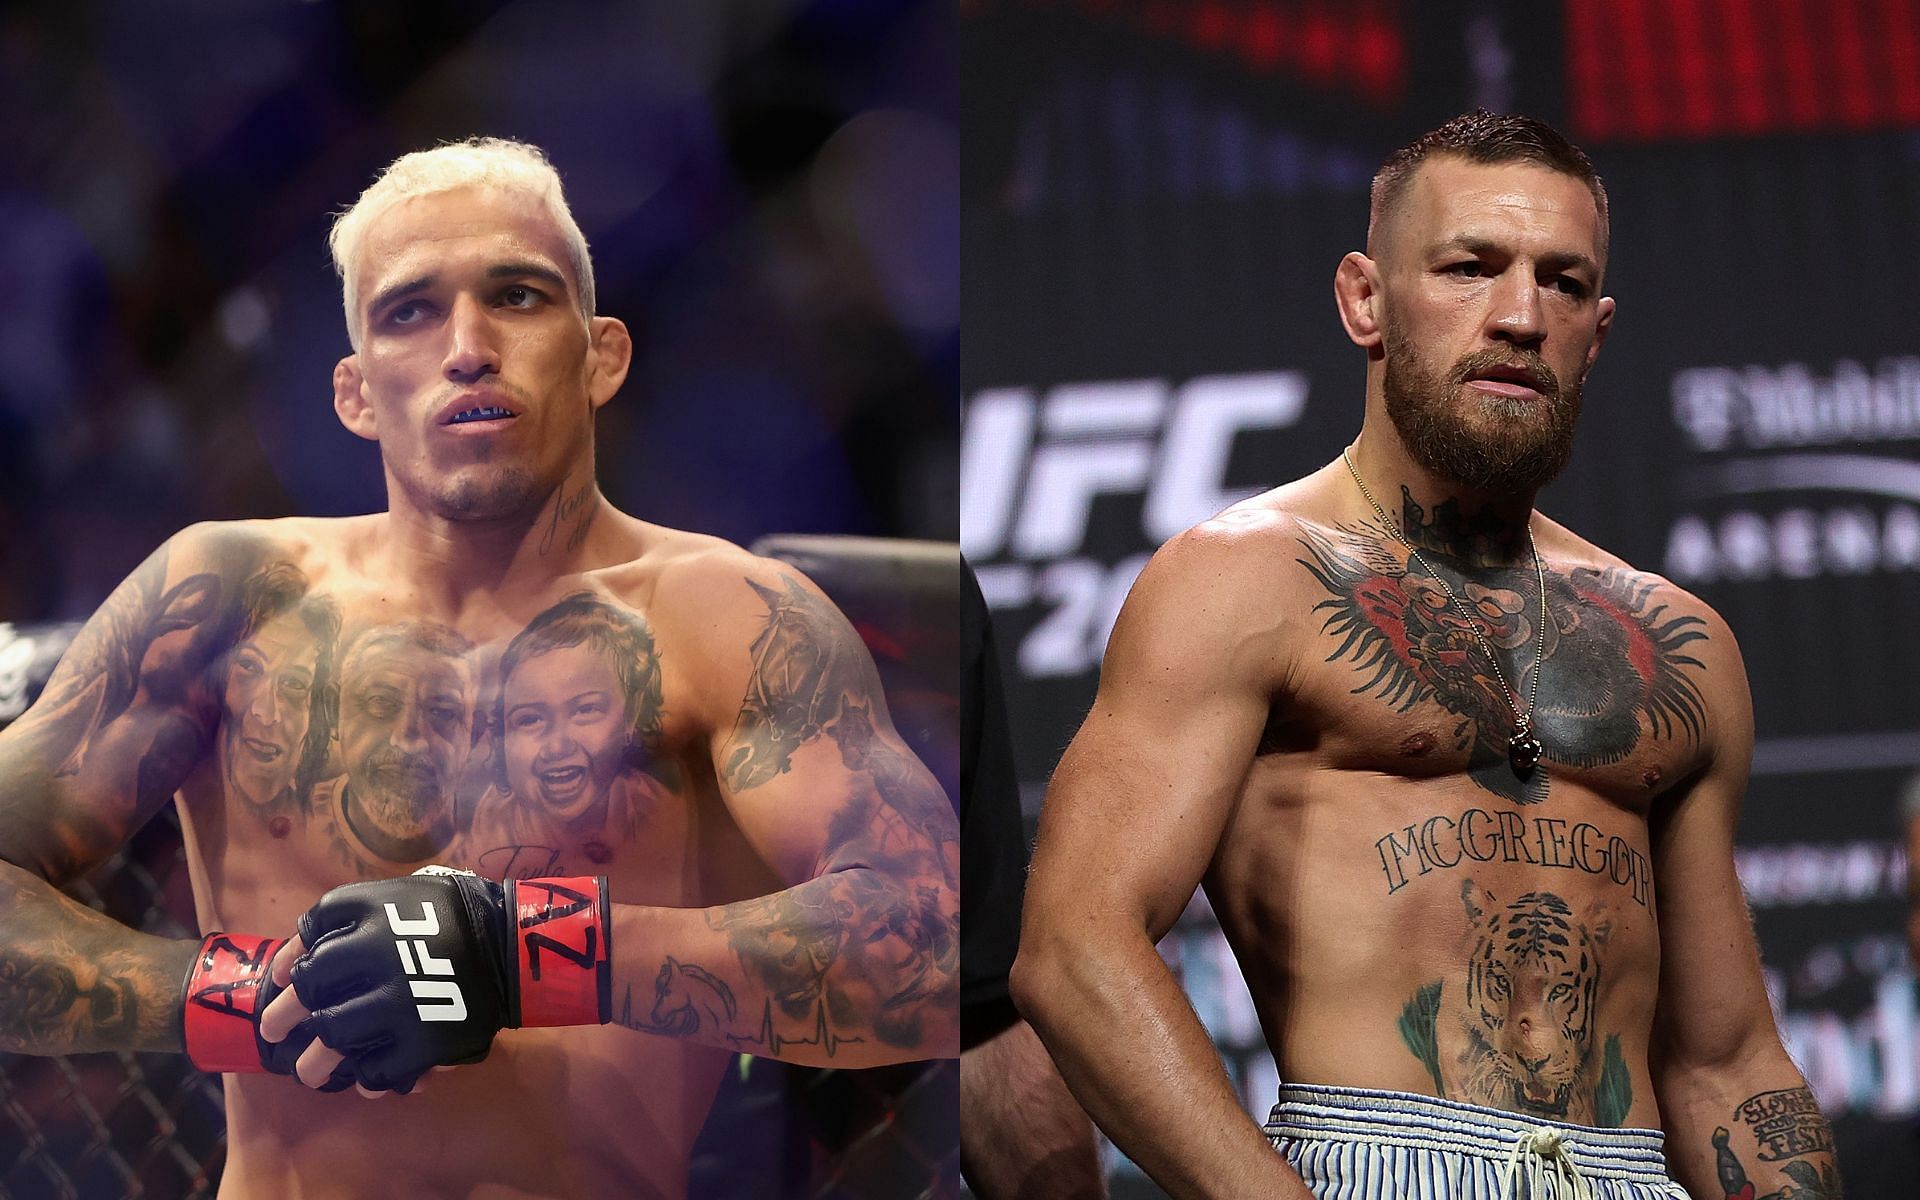 Charles Oliveira (left) and Conor McGregor (right) (Image credits Getty Images)